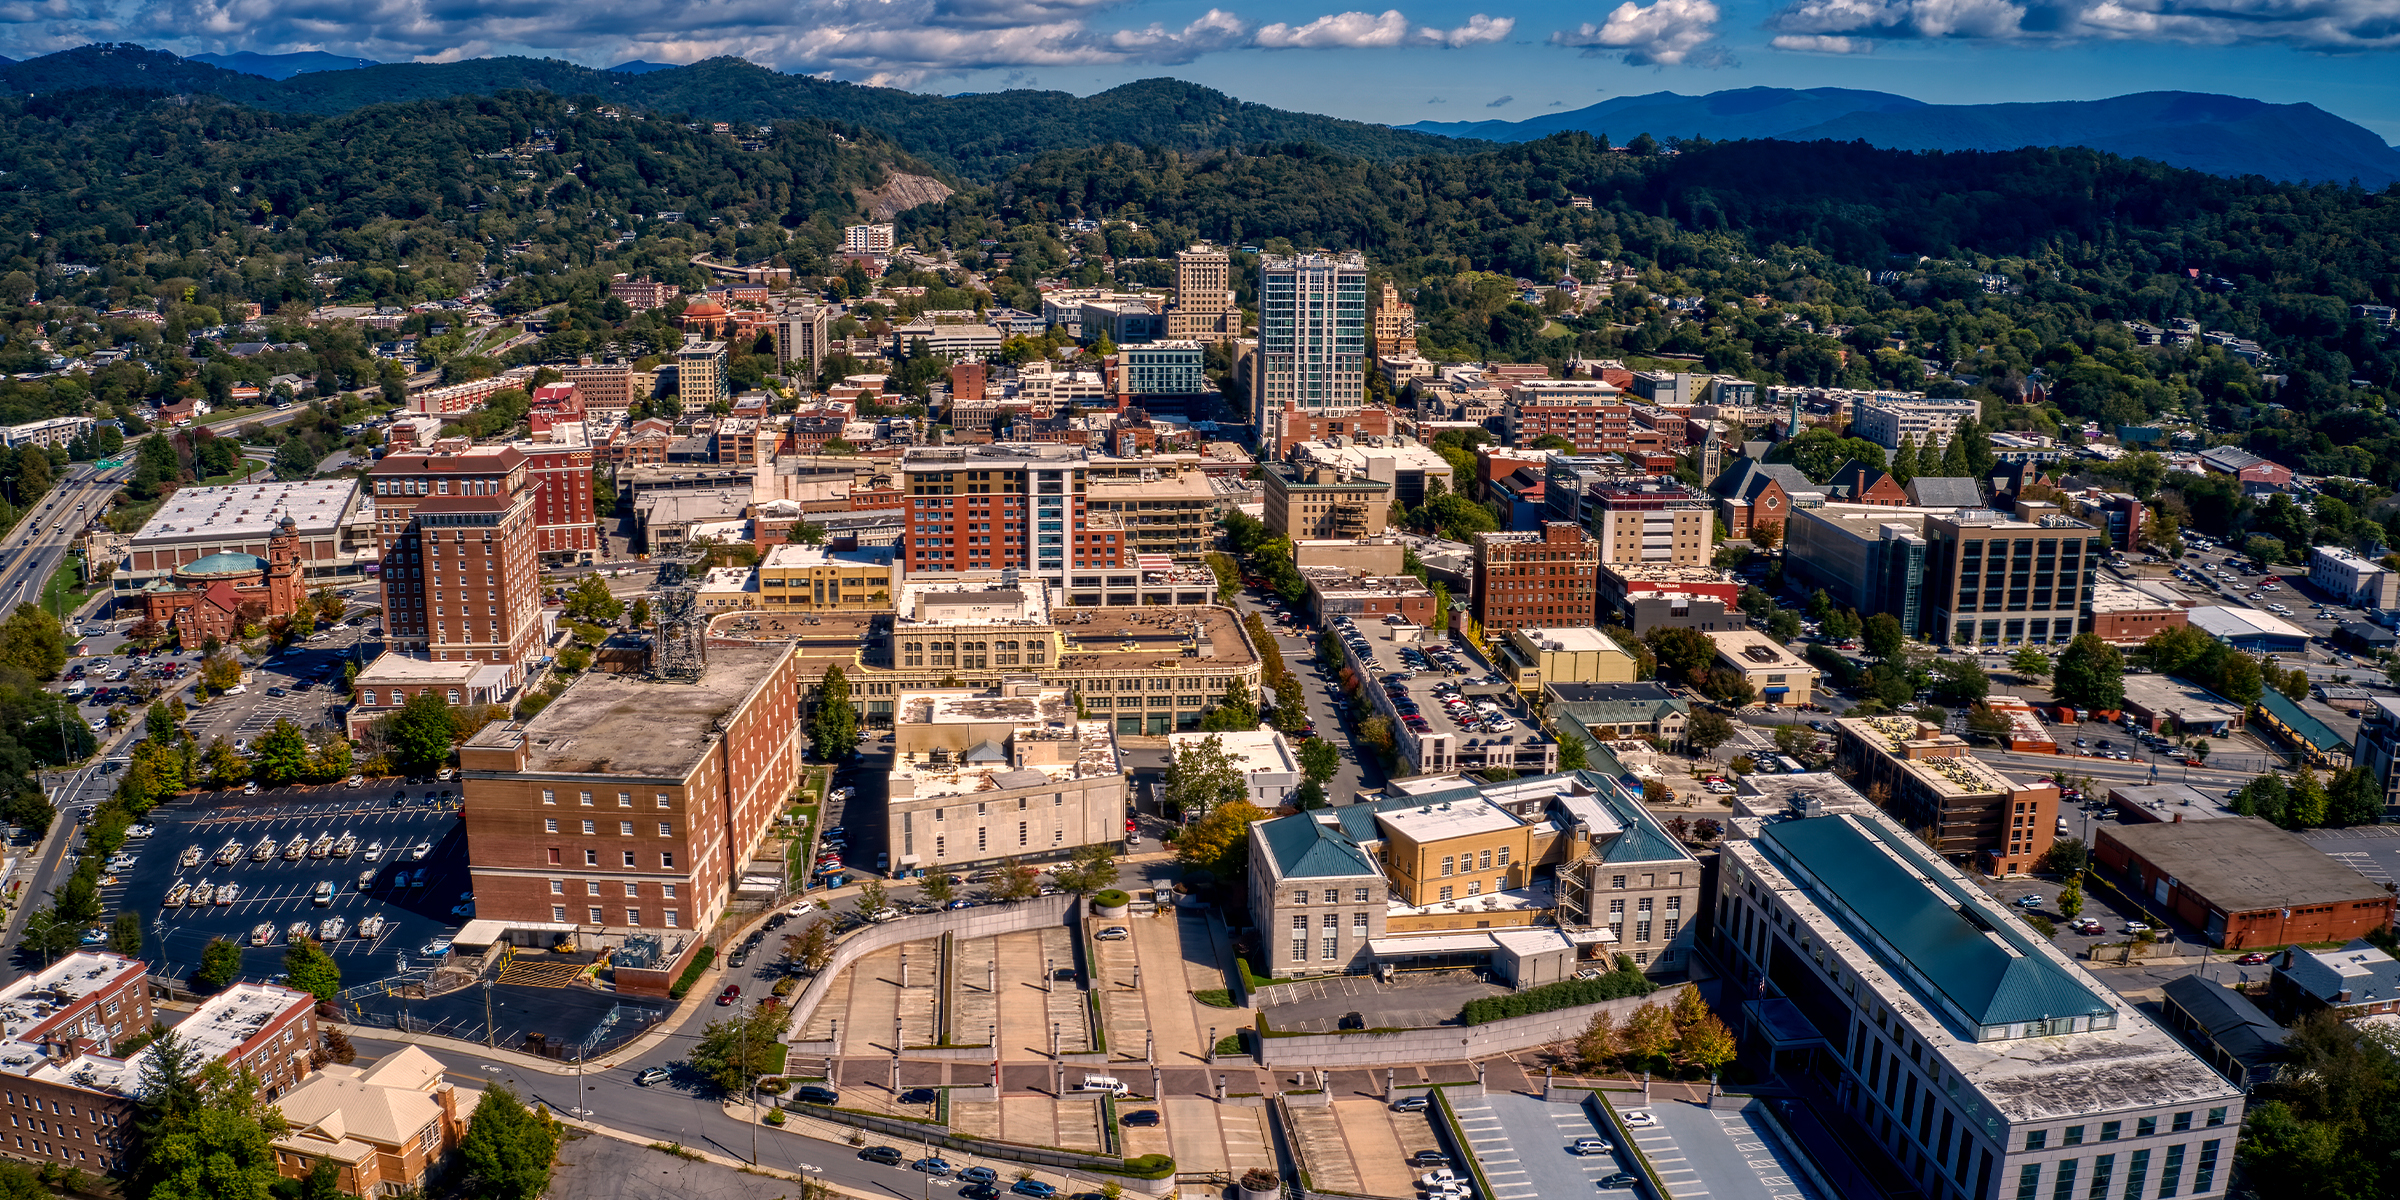 Aerial view of Asheville | Source: Getty Images